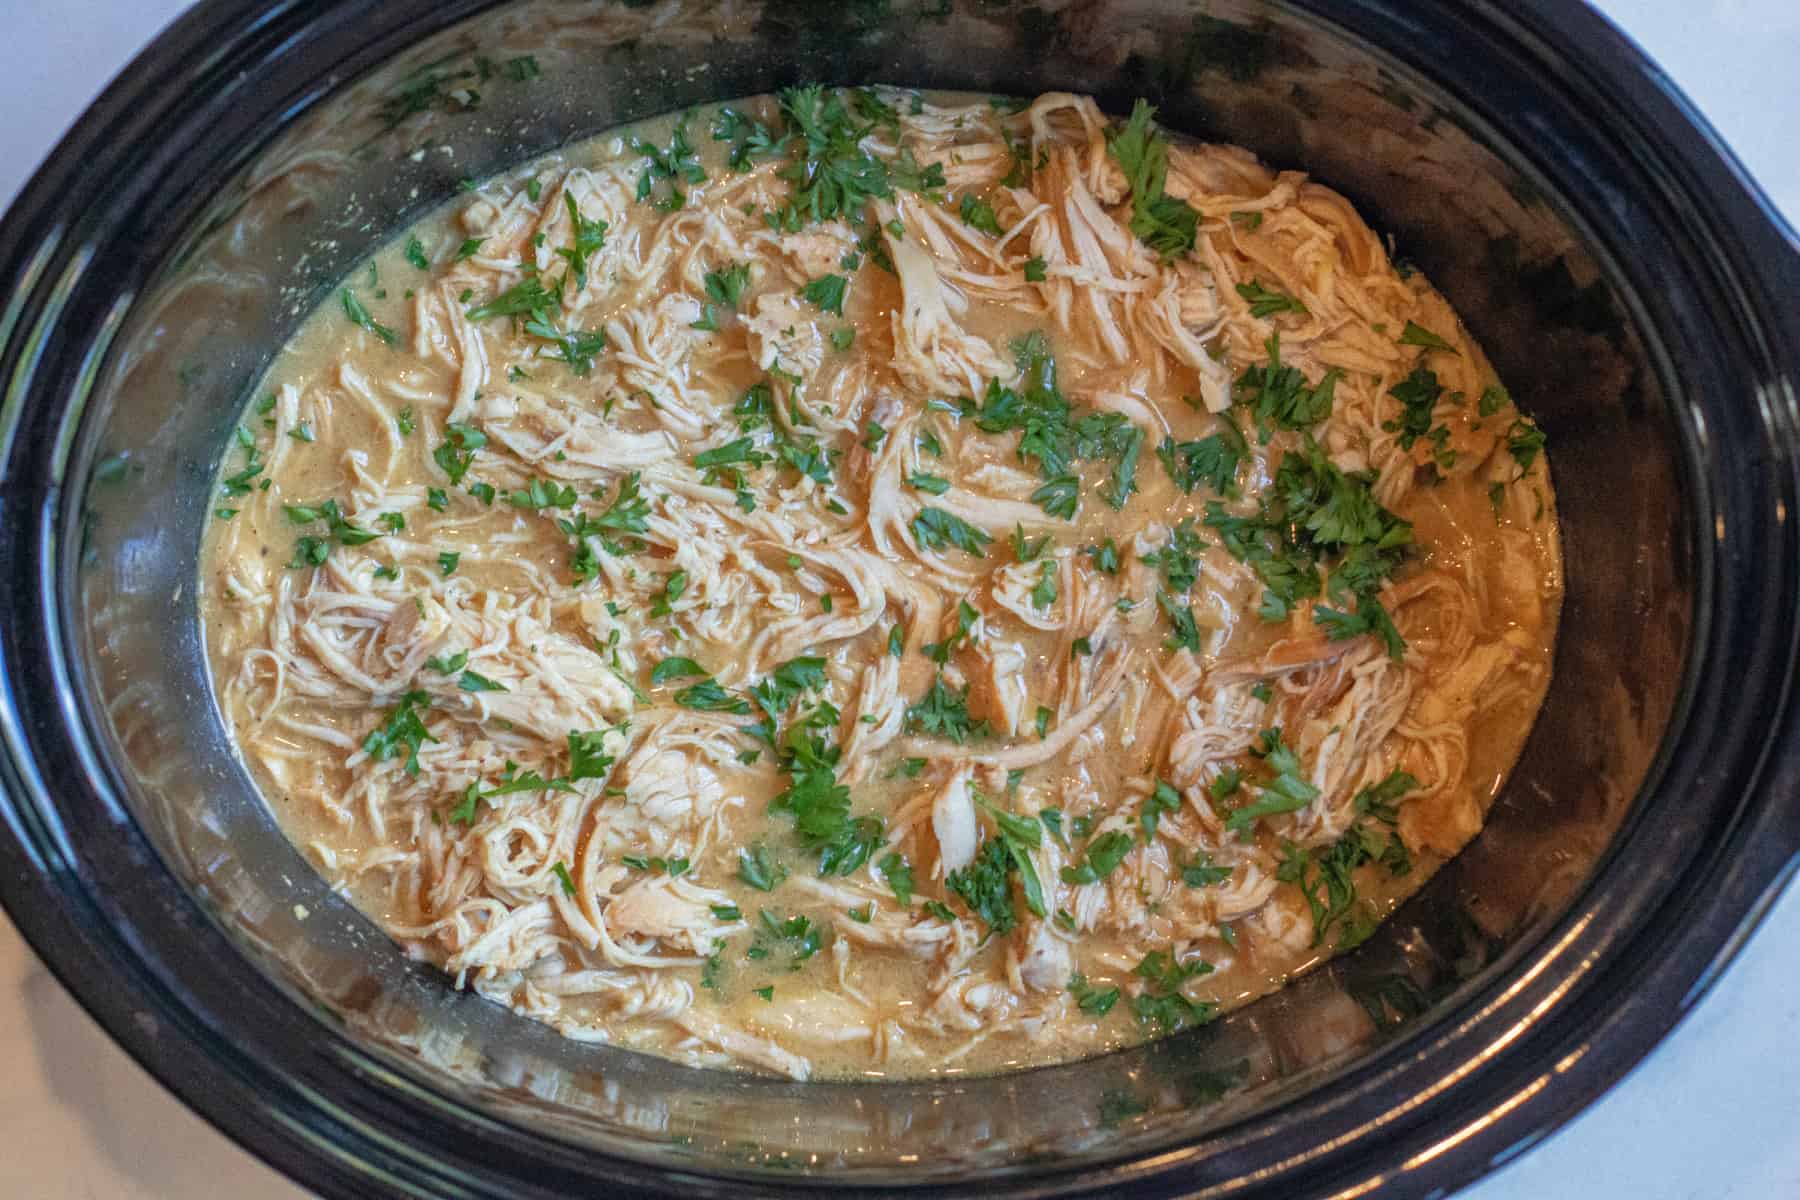 shredded chicken with parsley in a crock pot.